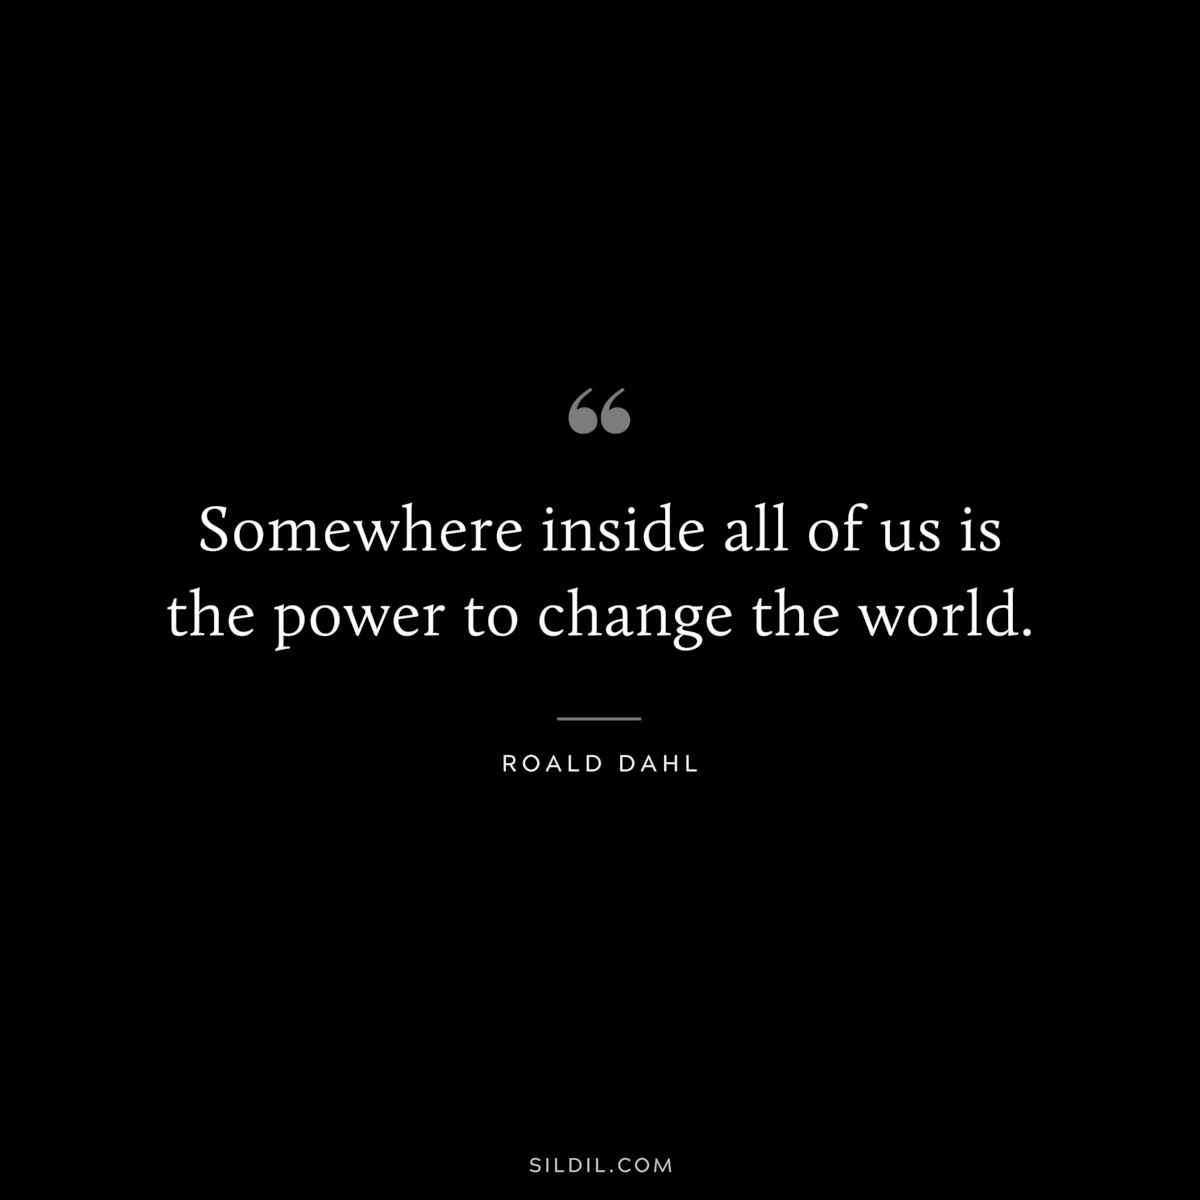 Somewhere inside all of us is the power to change the world. ― Roald Dahl